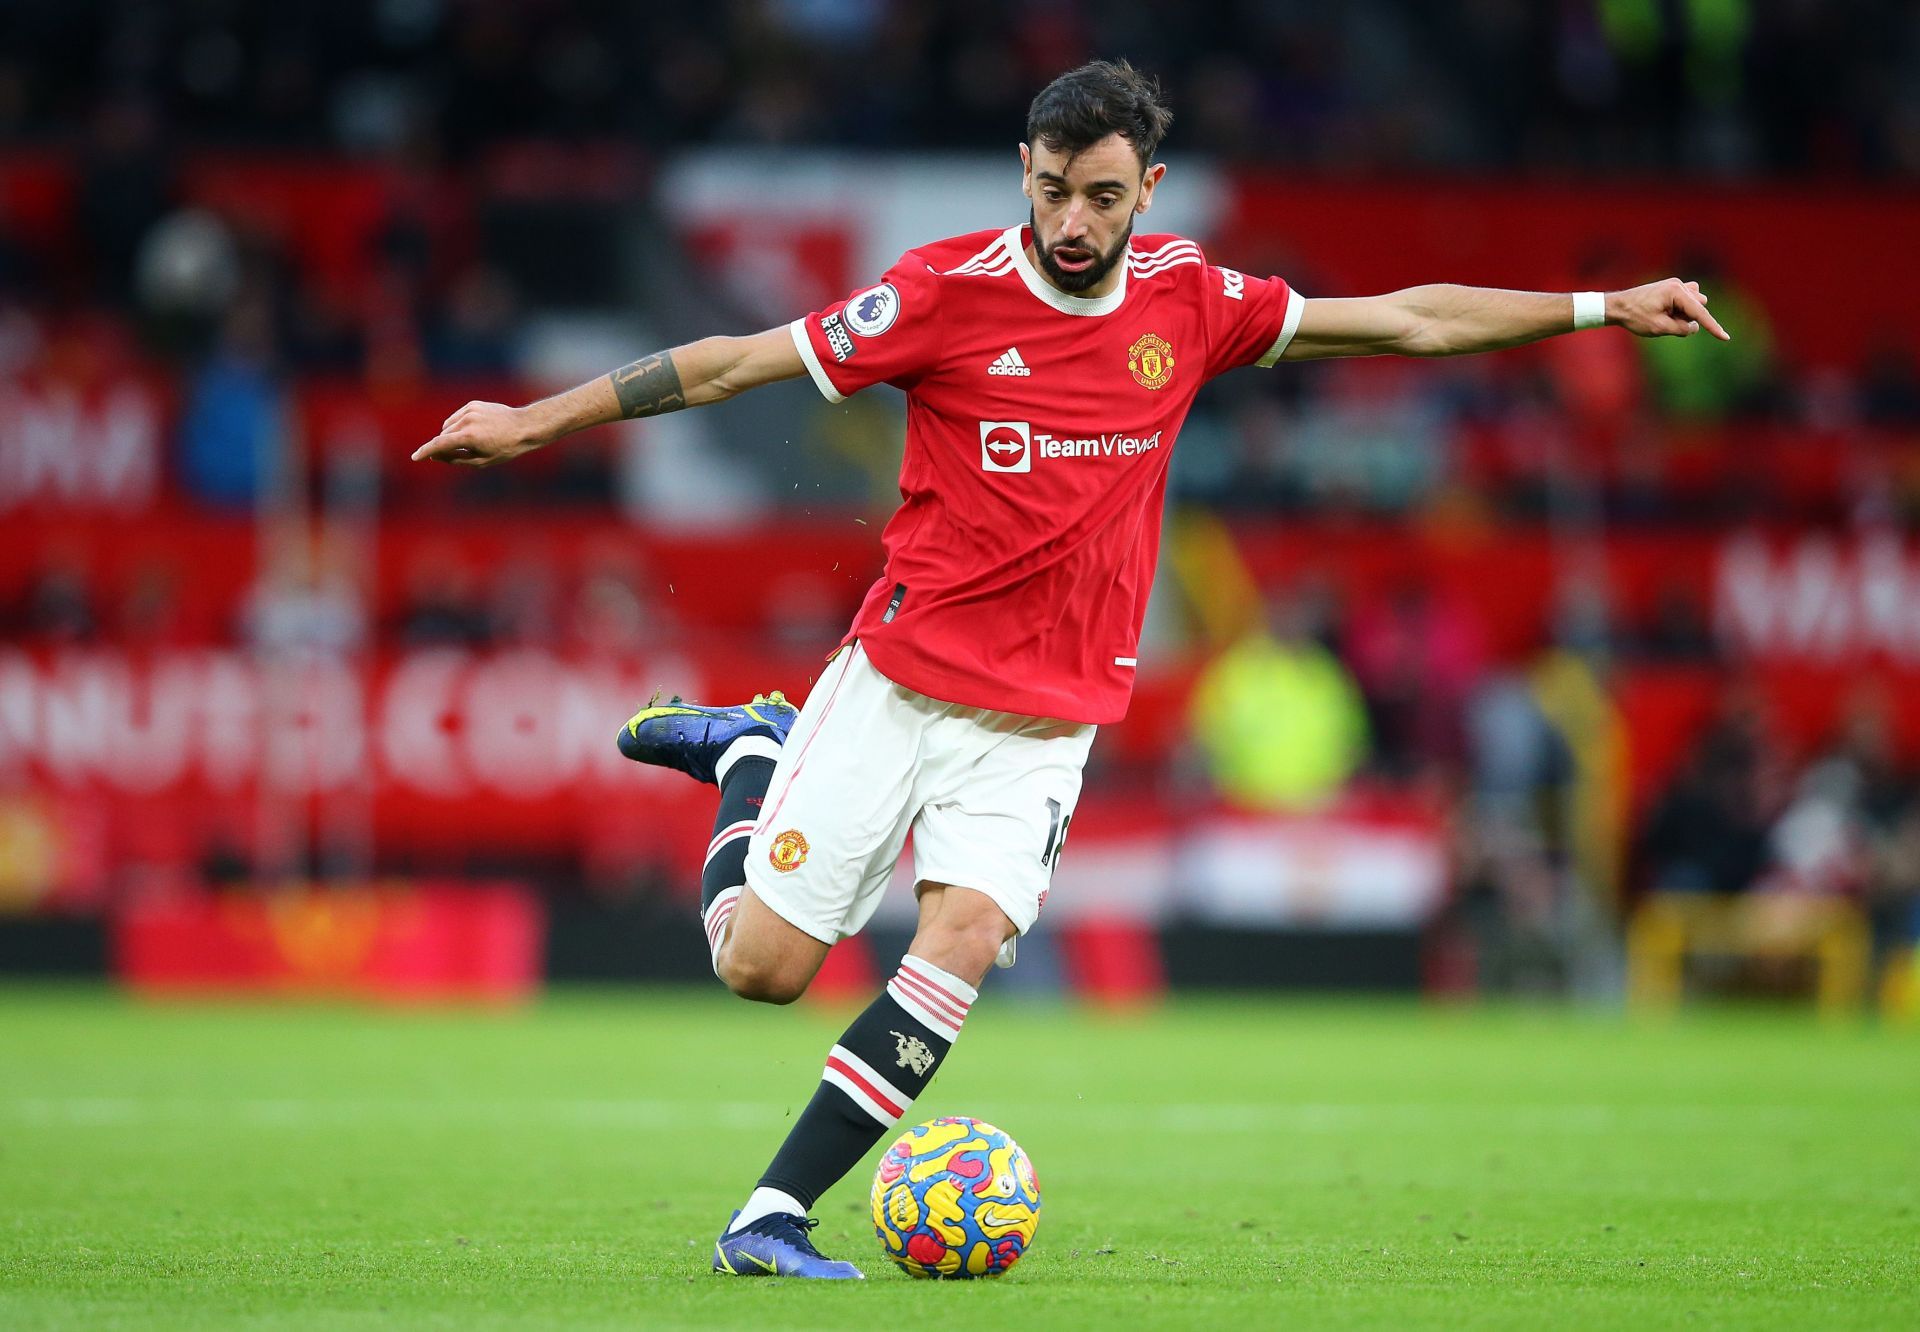 Portuguese midfielder Bruno Fernandes has been a key player for Manchester United since he joined the club